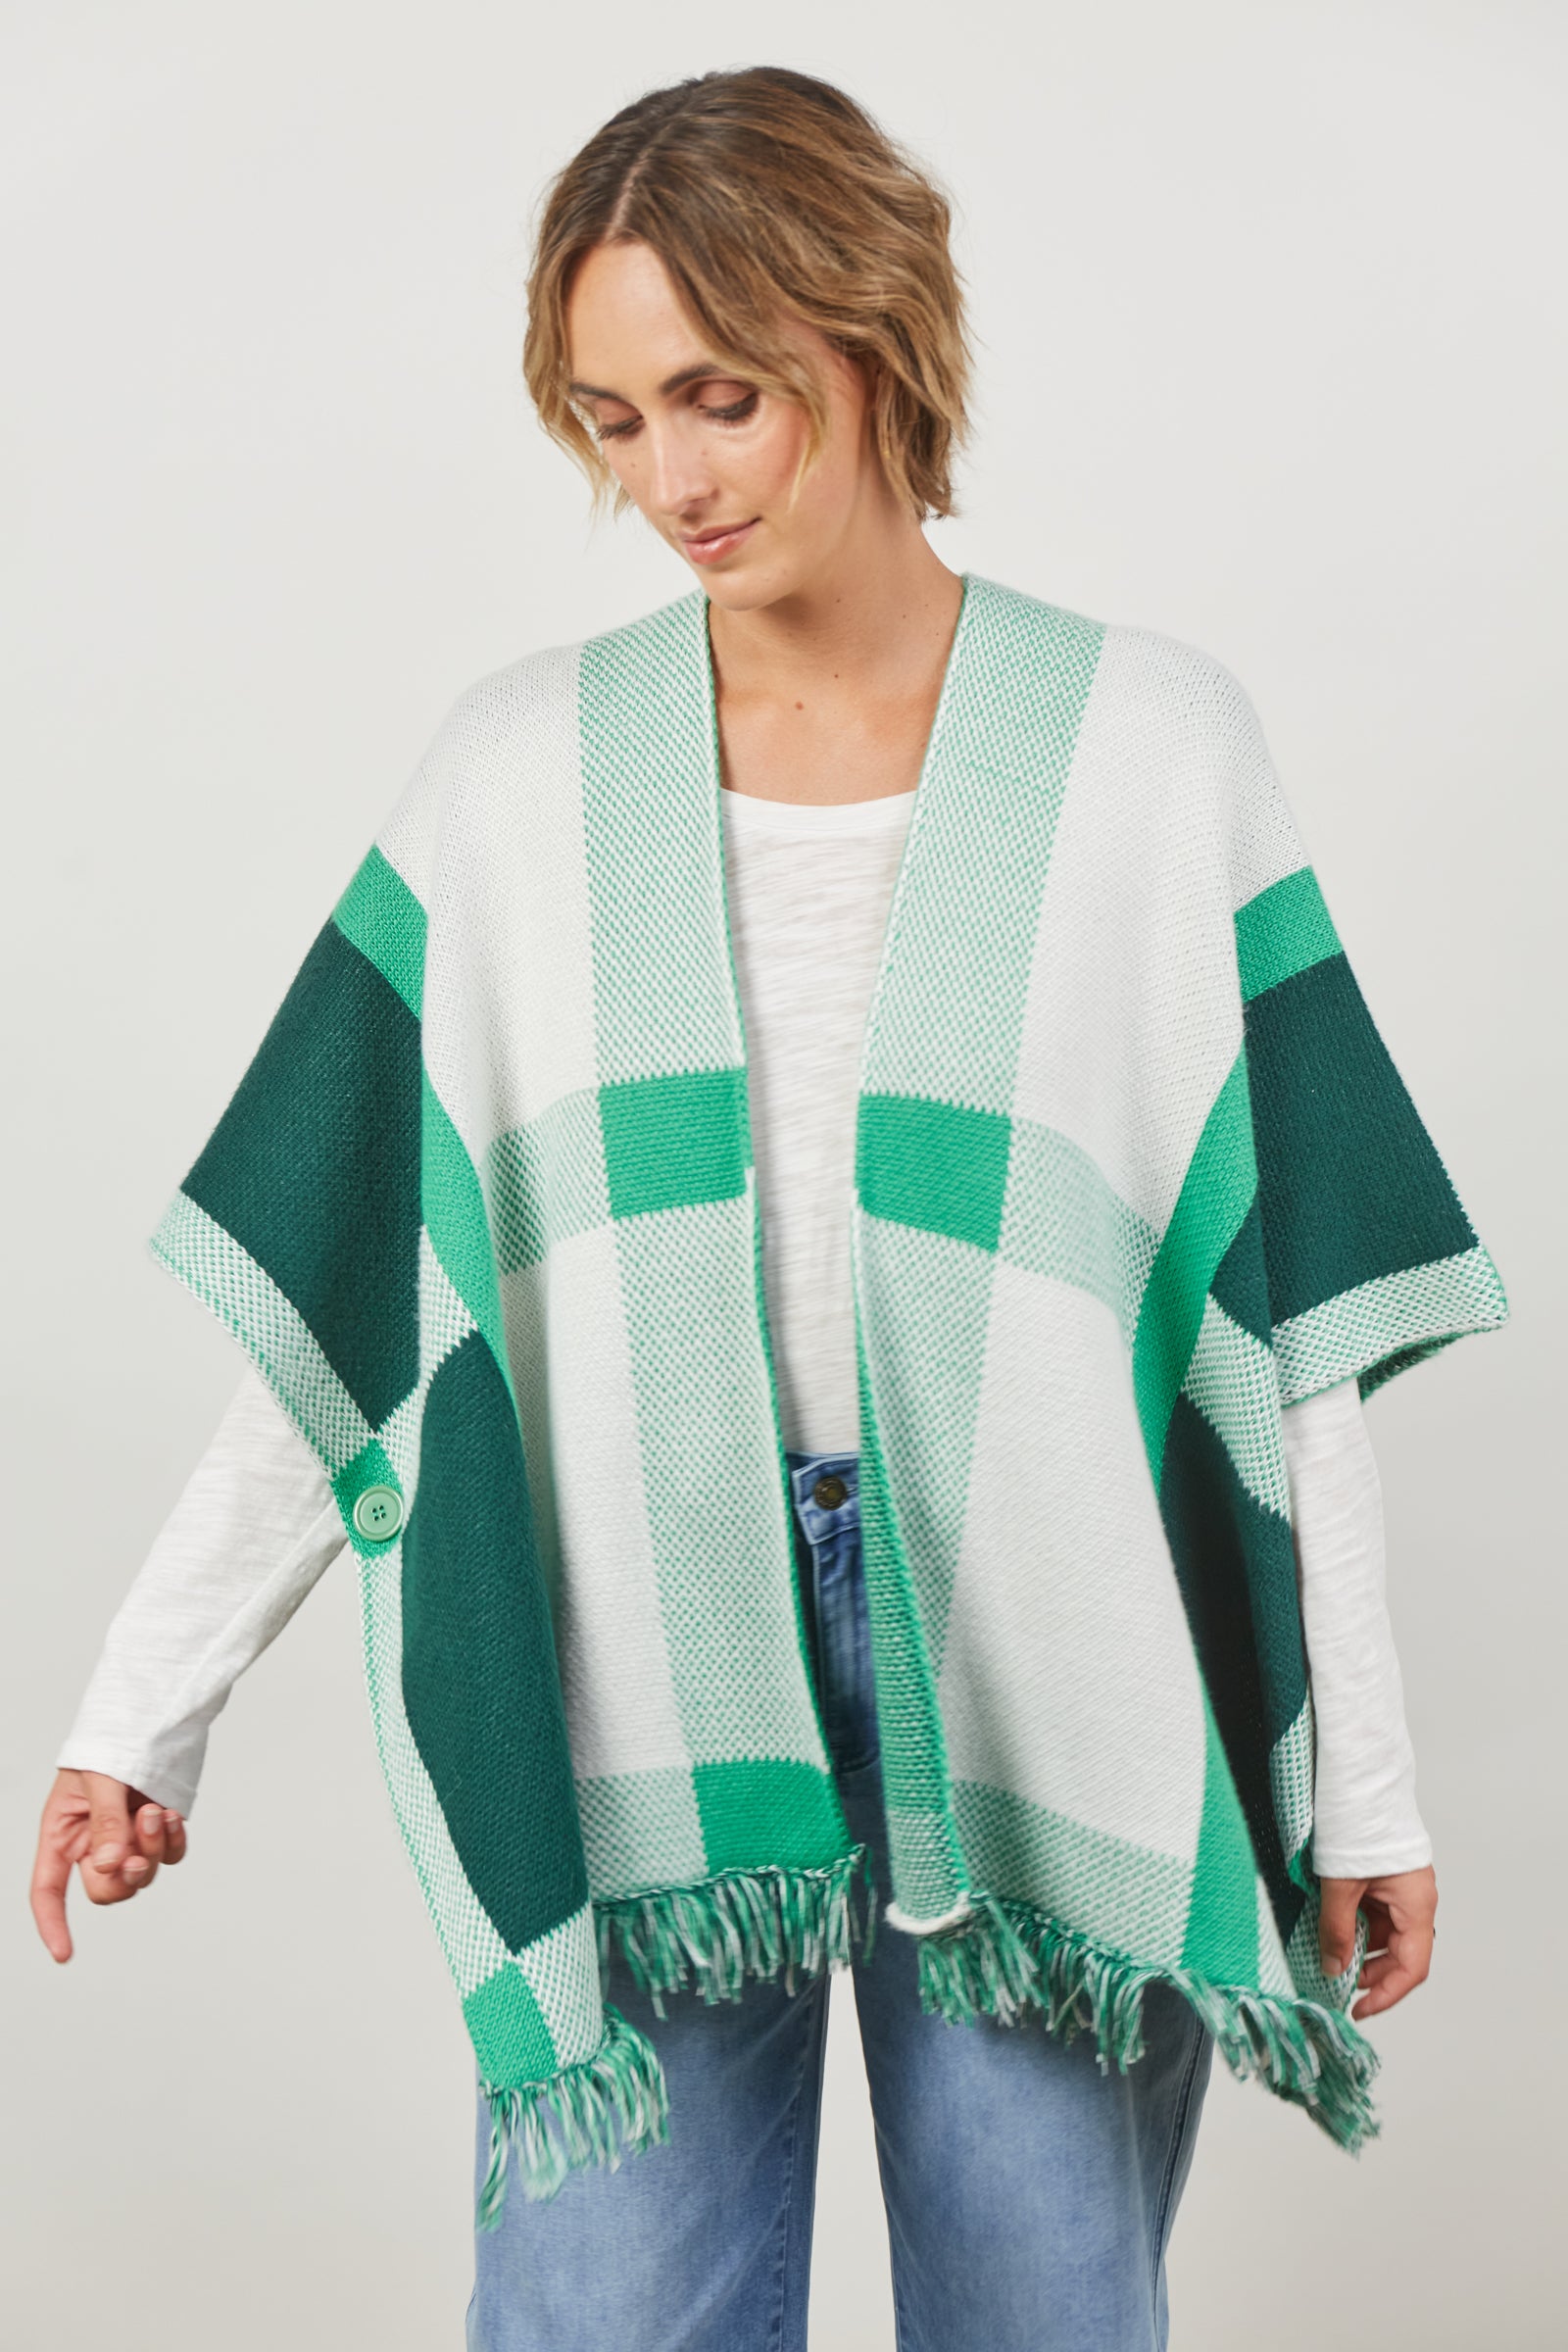 Vista Cape - Meadow - Isle of Mine Clothing - Knit Cape One Size